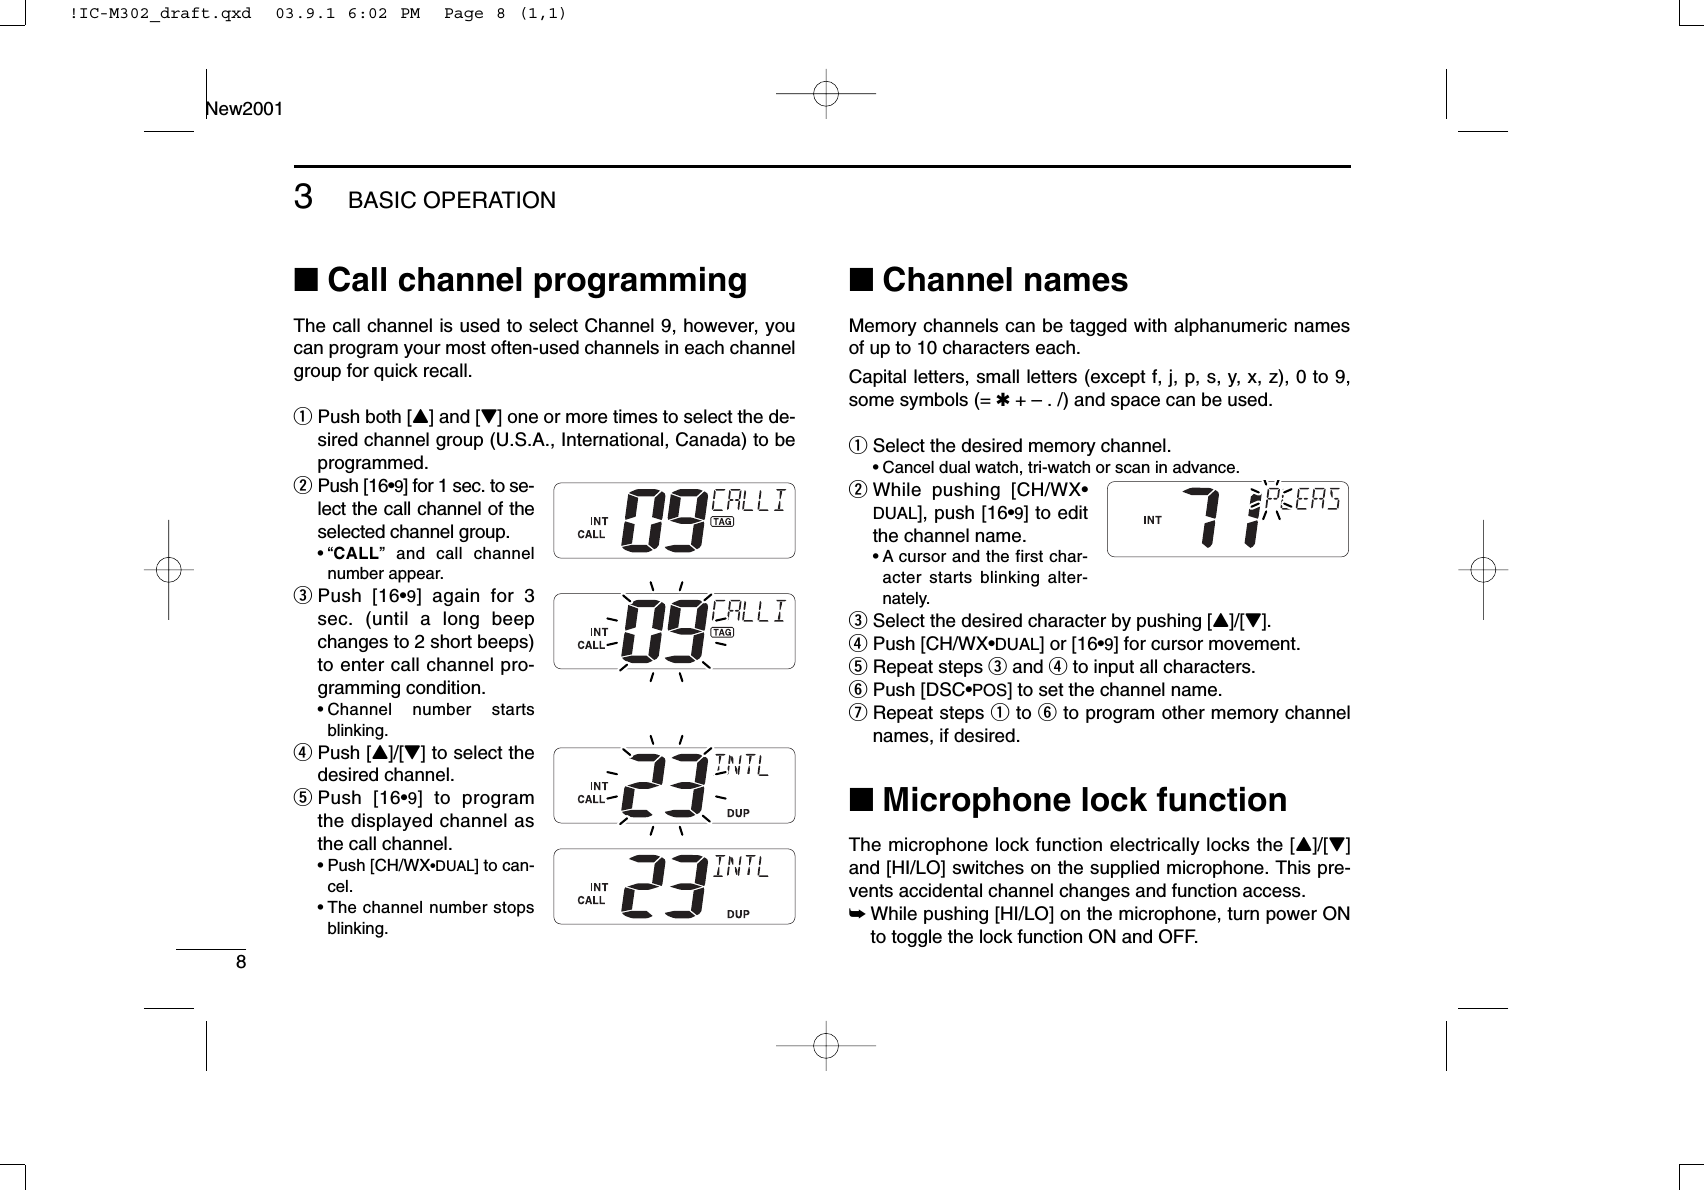 83BASIC OPERATIONNew2001■Call channel programmingThe call channel is used to select Channel 9, however, youcan program your most often-used channels in each channelgroup for quick recall.qPush both [Y] and [Z] one or more times to select the de-sired channel group (U.S.A., International, Canada) to beprogrammed.wPush [16•9] for 1 sec. to se-lect the call channel of theselected channel group.•“CALL” and call channelnumber appear.ePush [16•9] again for 3sec. (until a long beepchanges to 2 short beeps)to enter call channel pro-gramming condition.•Channel number startsblinking.rPush [Y]/[Z] to select thedesired channel.tPush [16•9] to programthe displayed channel asthe call channel.•Push [CH/WX•DUAL] to can-cel.•The channel number stopsblinking.■Channel namesMemory channels can be tagged with alphanumeric namesof up to 10 characters each.Capital letters, small letters (except f, j, p, s, y, x, z), 0 to 9,some symbols (= ✱+ – . /) and space can be used.qSelect the desired memory channel.•Cancel dual watch, tri-watch or scan in advance.wWhile pushing [CH/WX•DUAL], push [16•9] to editthe channel name.•A cursor and the first char-acter starts blinking alter-nately.eSelect the desired character by pushing [Y]/[Z].rPush [CH/WX•DUAL] or [16•9] for cursor movement.tRepeat steps eand rto input all characters.yPush [DSC•POS] to set the channel name.uRepeat steps qto yto program other memory channelnames, if desired.■Microphone lock functionThe microphone lock function electrically locks the [Y]/[Z]and [HI/LO] switches on the supplied microphone. This pre-vents accidental channel changes and function access.➥While pushing [HI/LO] on the microphone, turn power ONto toggle the lock function ON and OFF.!IC-M302_draft.qxd  03.9.1 6:02 PM  Page 8 (1,1)